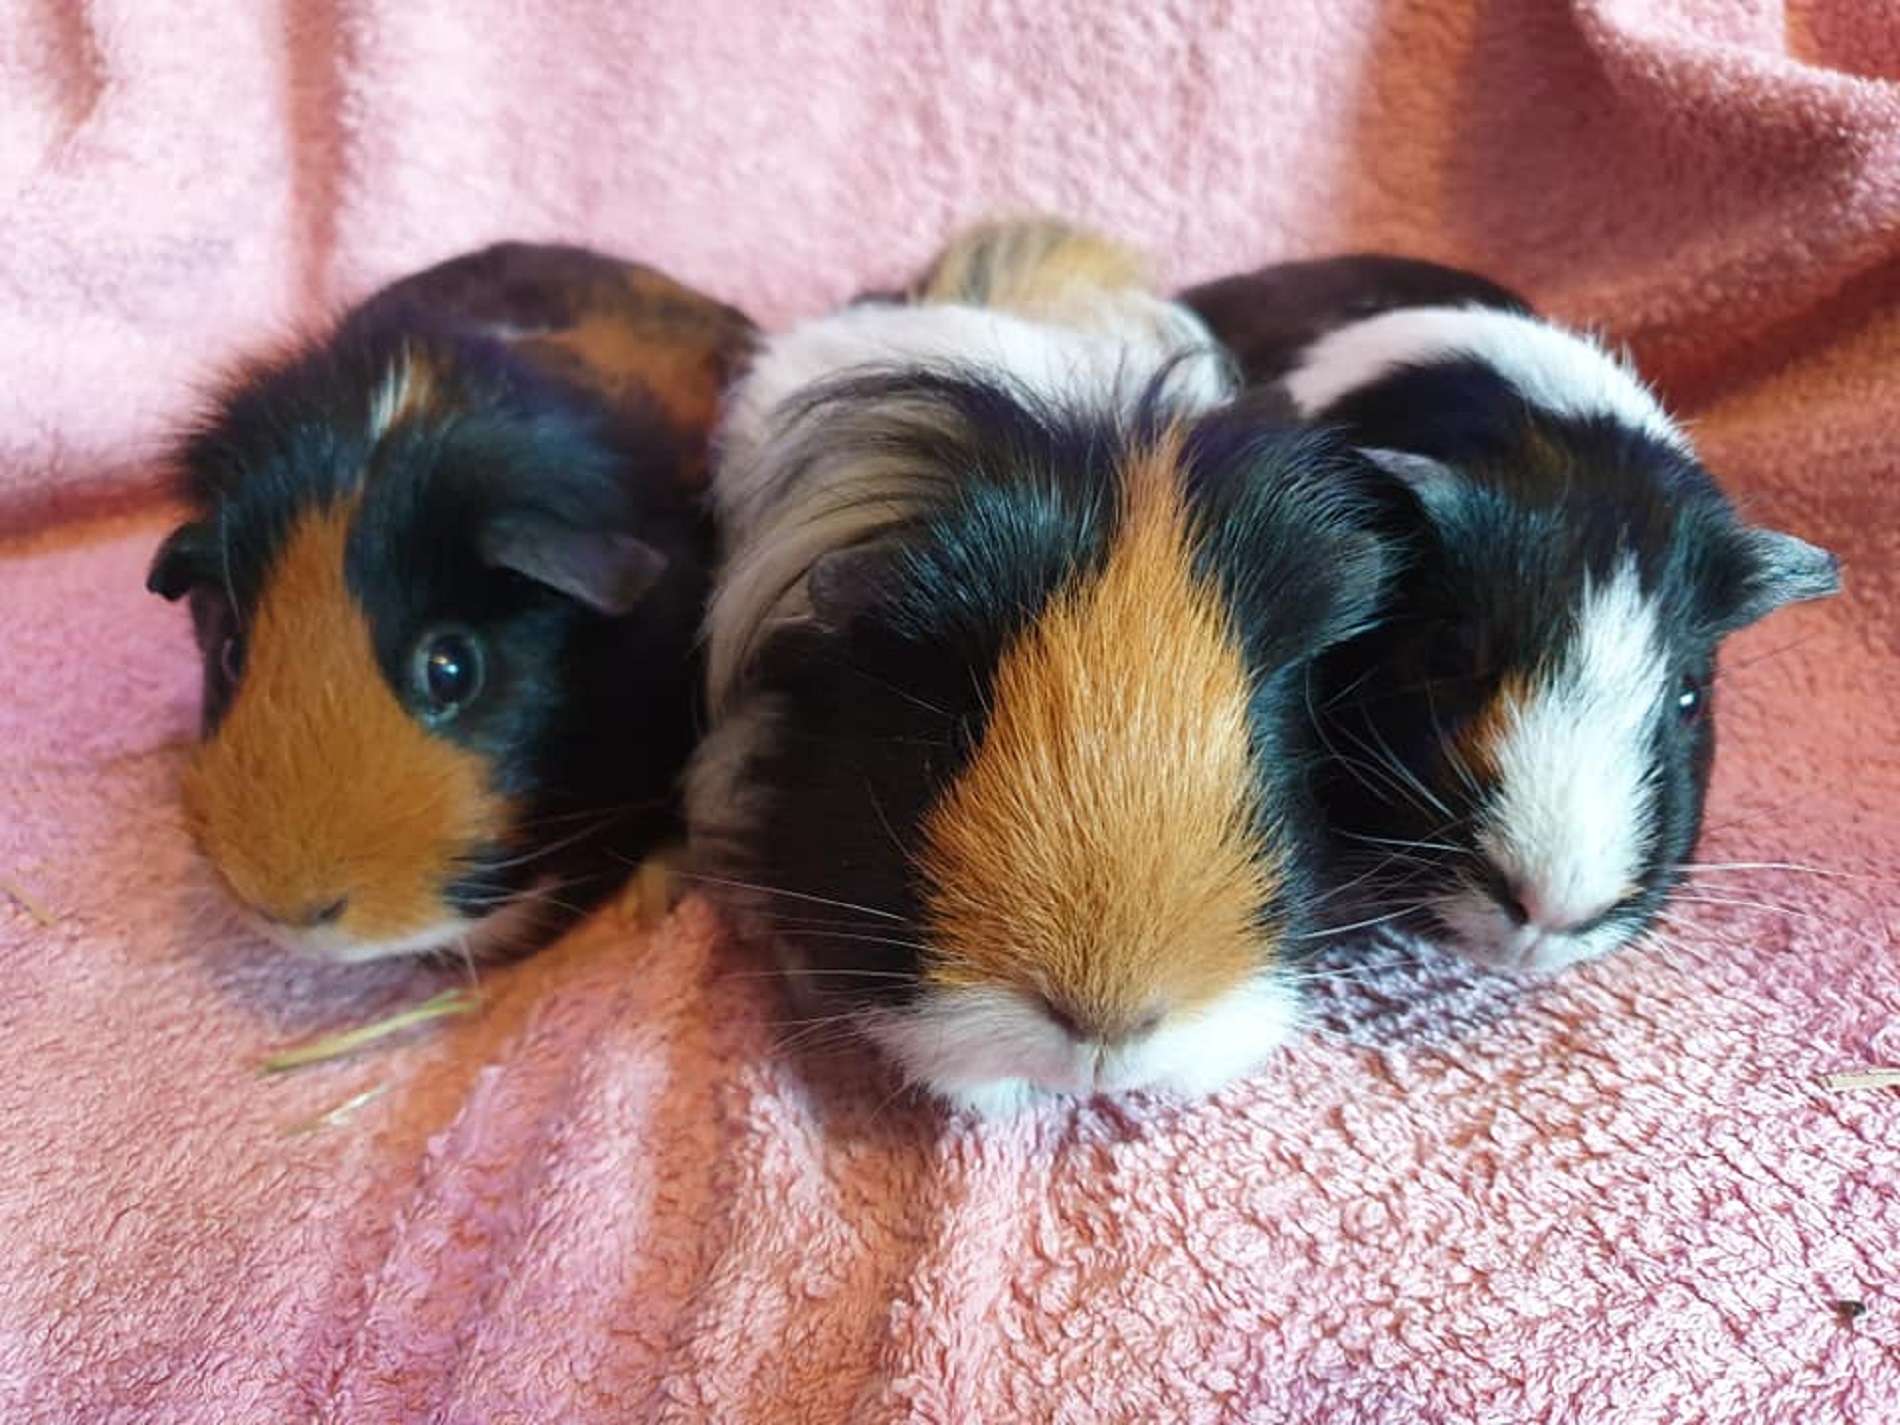 PEBBLES, SPIKE & SQUEAK July 27th 2021